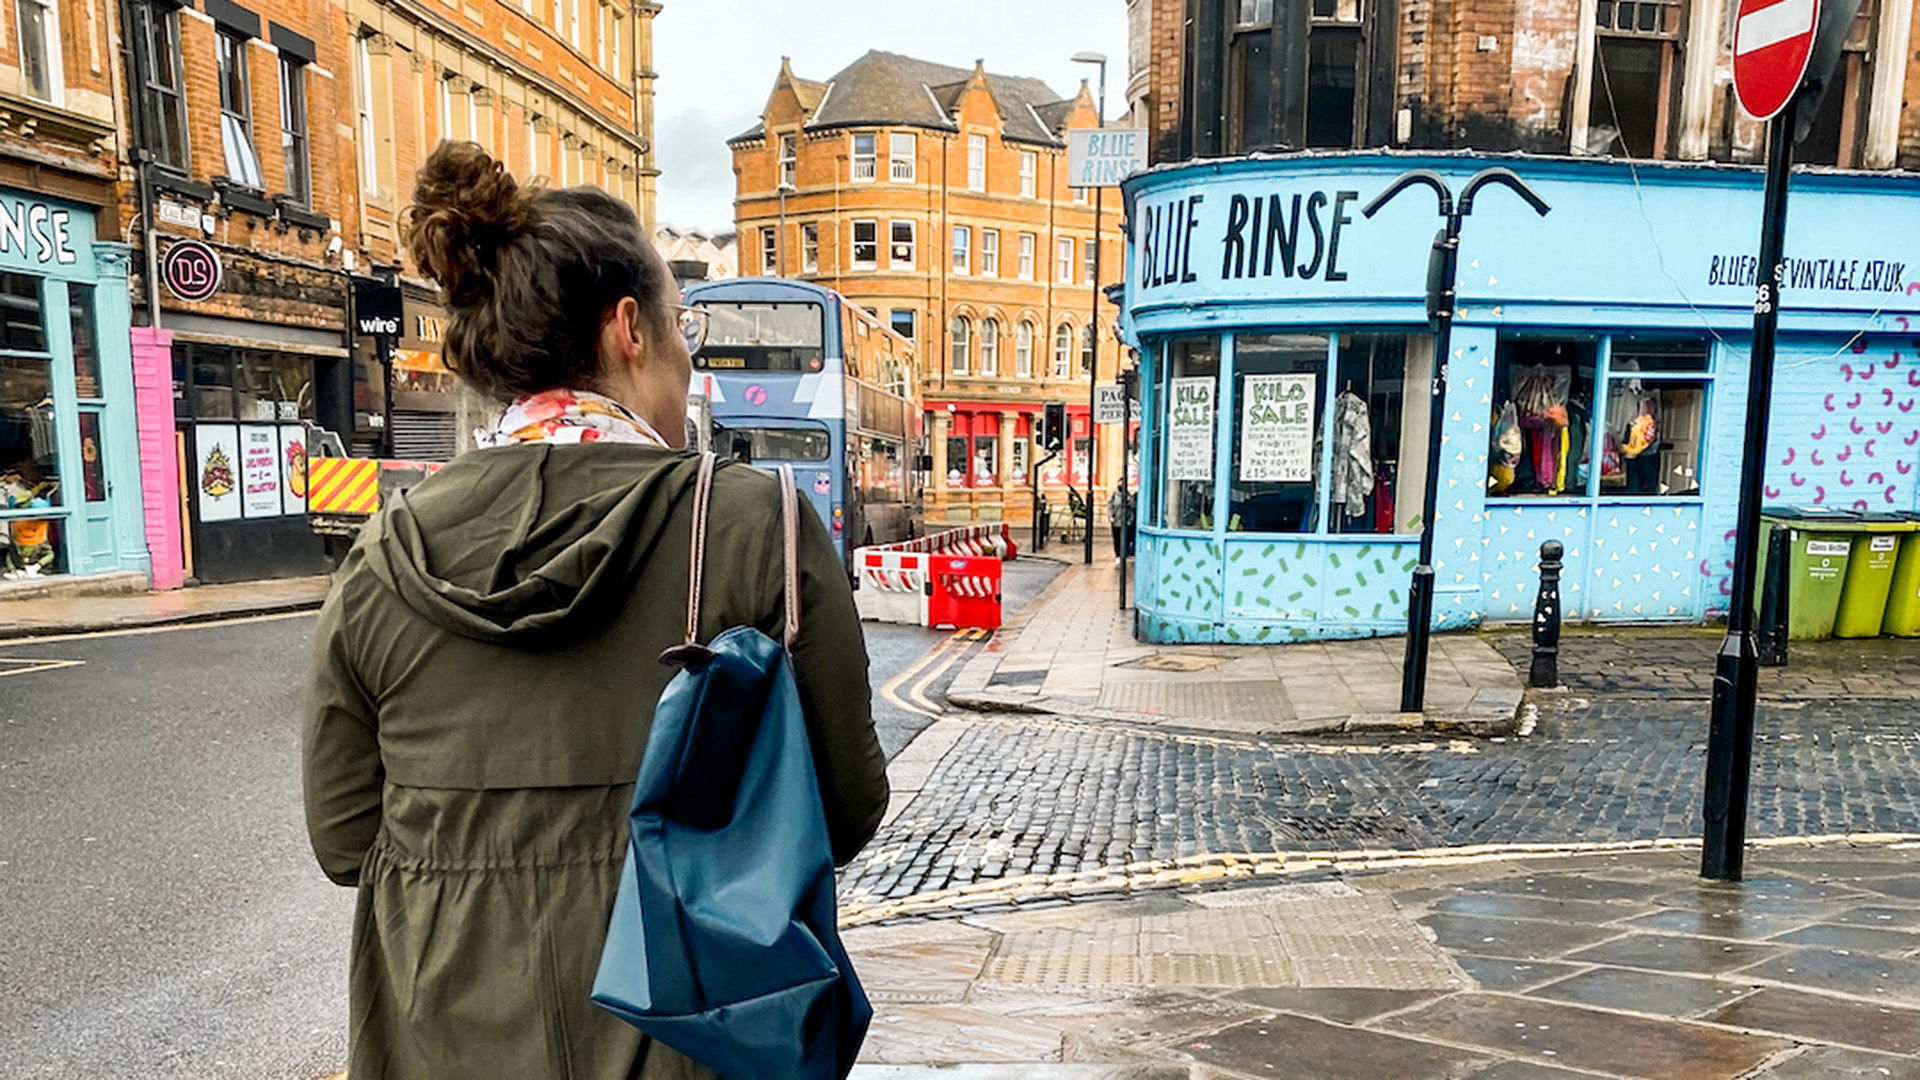 Sophia Roberts* walks through her new city in Northern England, where she's discipling university students and partnering with local churches to reach out to their unengaged neighbors as a Journeyman.